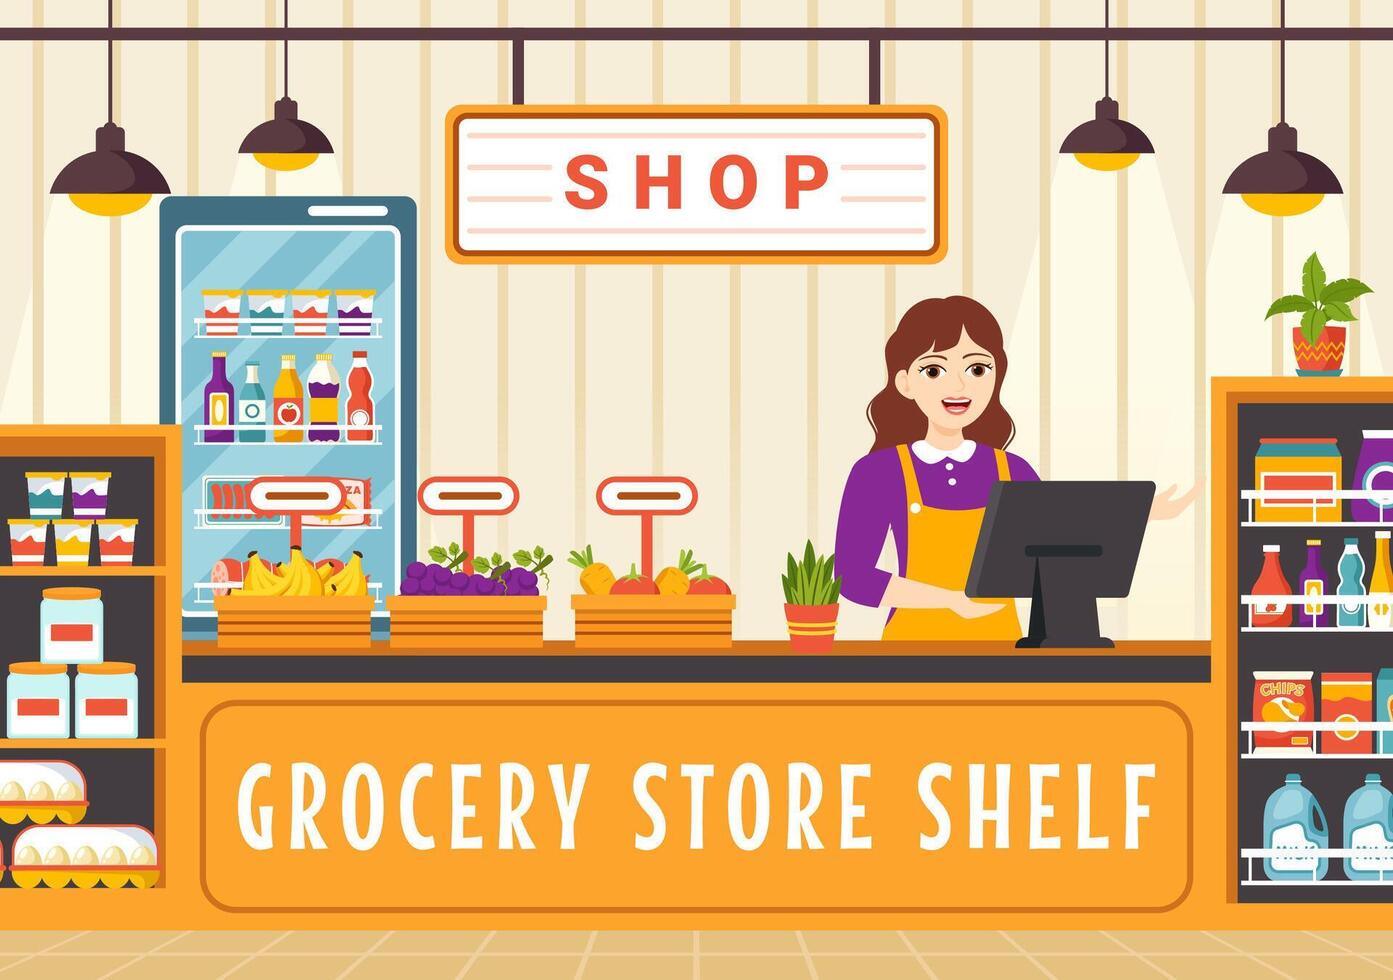 Grocery Store Shelf Vector Illustration with Foods Items and Products Assortiment on the Supermarket for Shopping Daily Needs in Flat Background